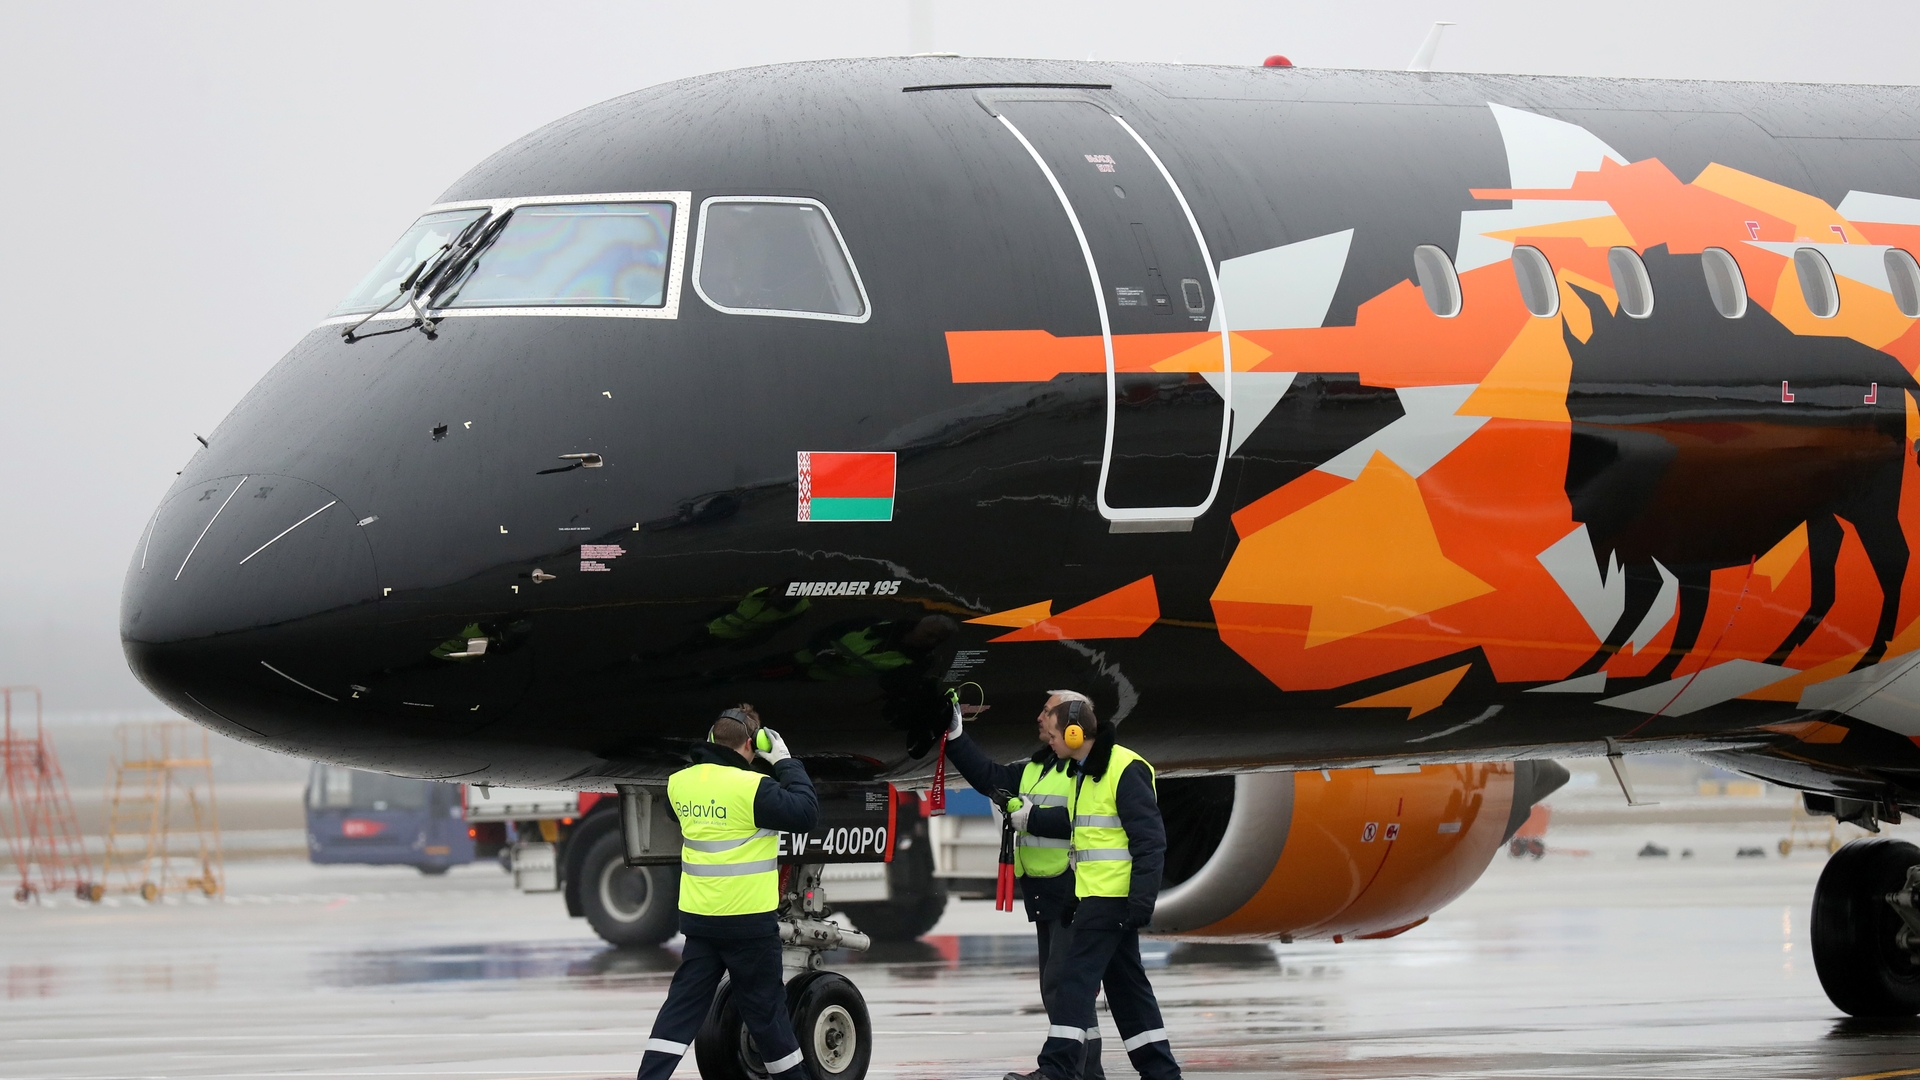 Presentation of the new plane of Belavia air company Embraer - 195 branded by World of Tanks